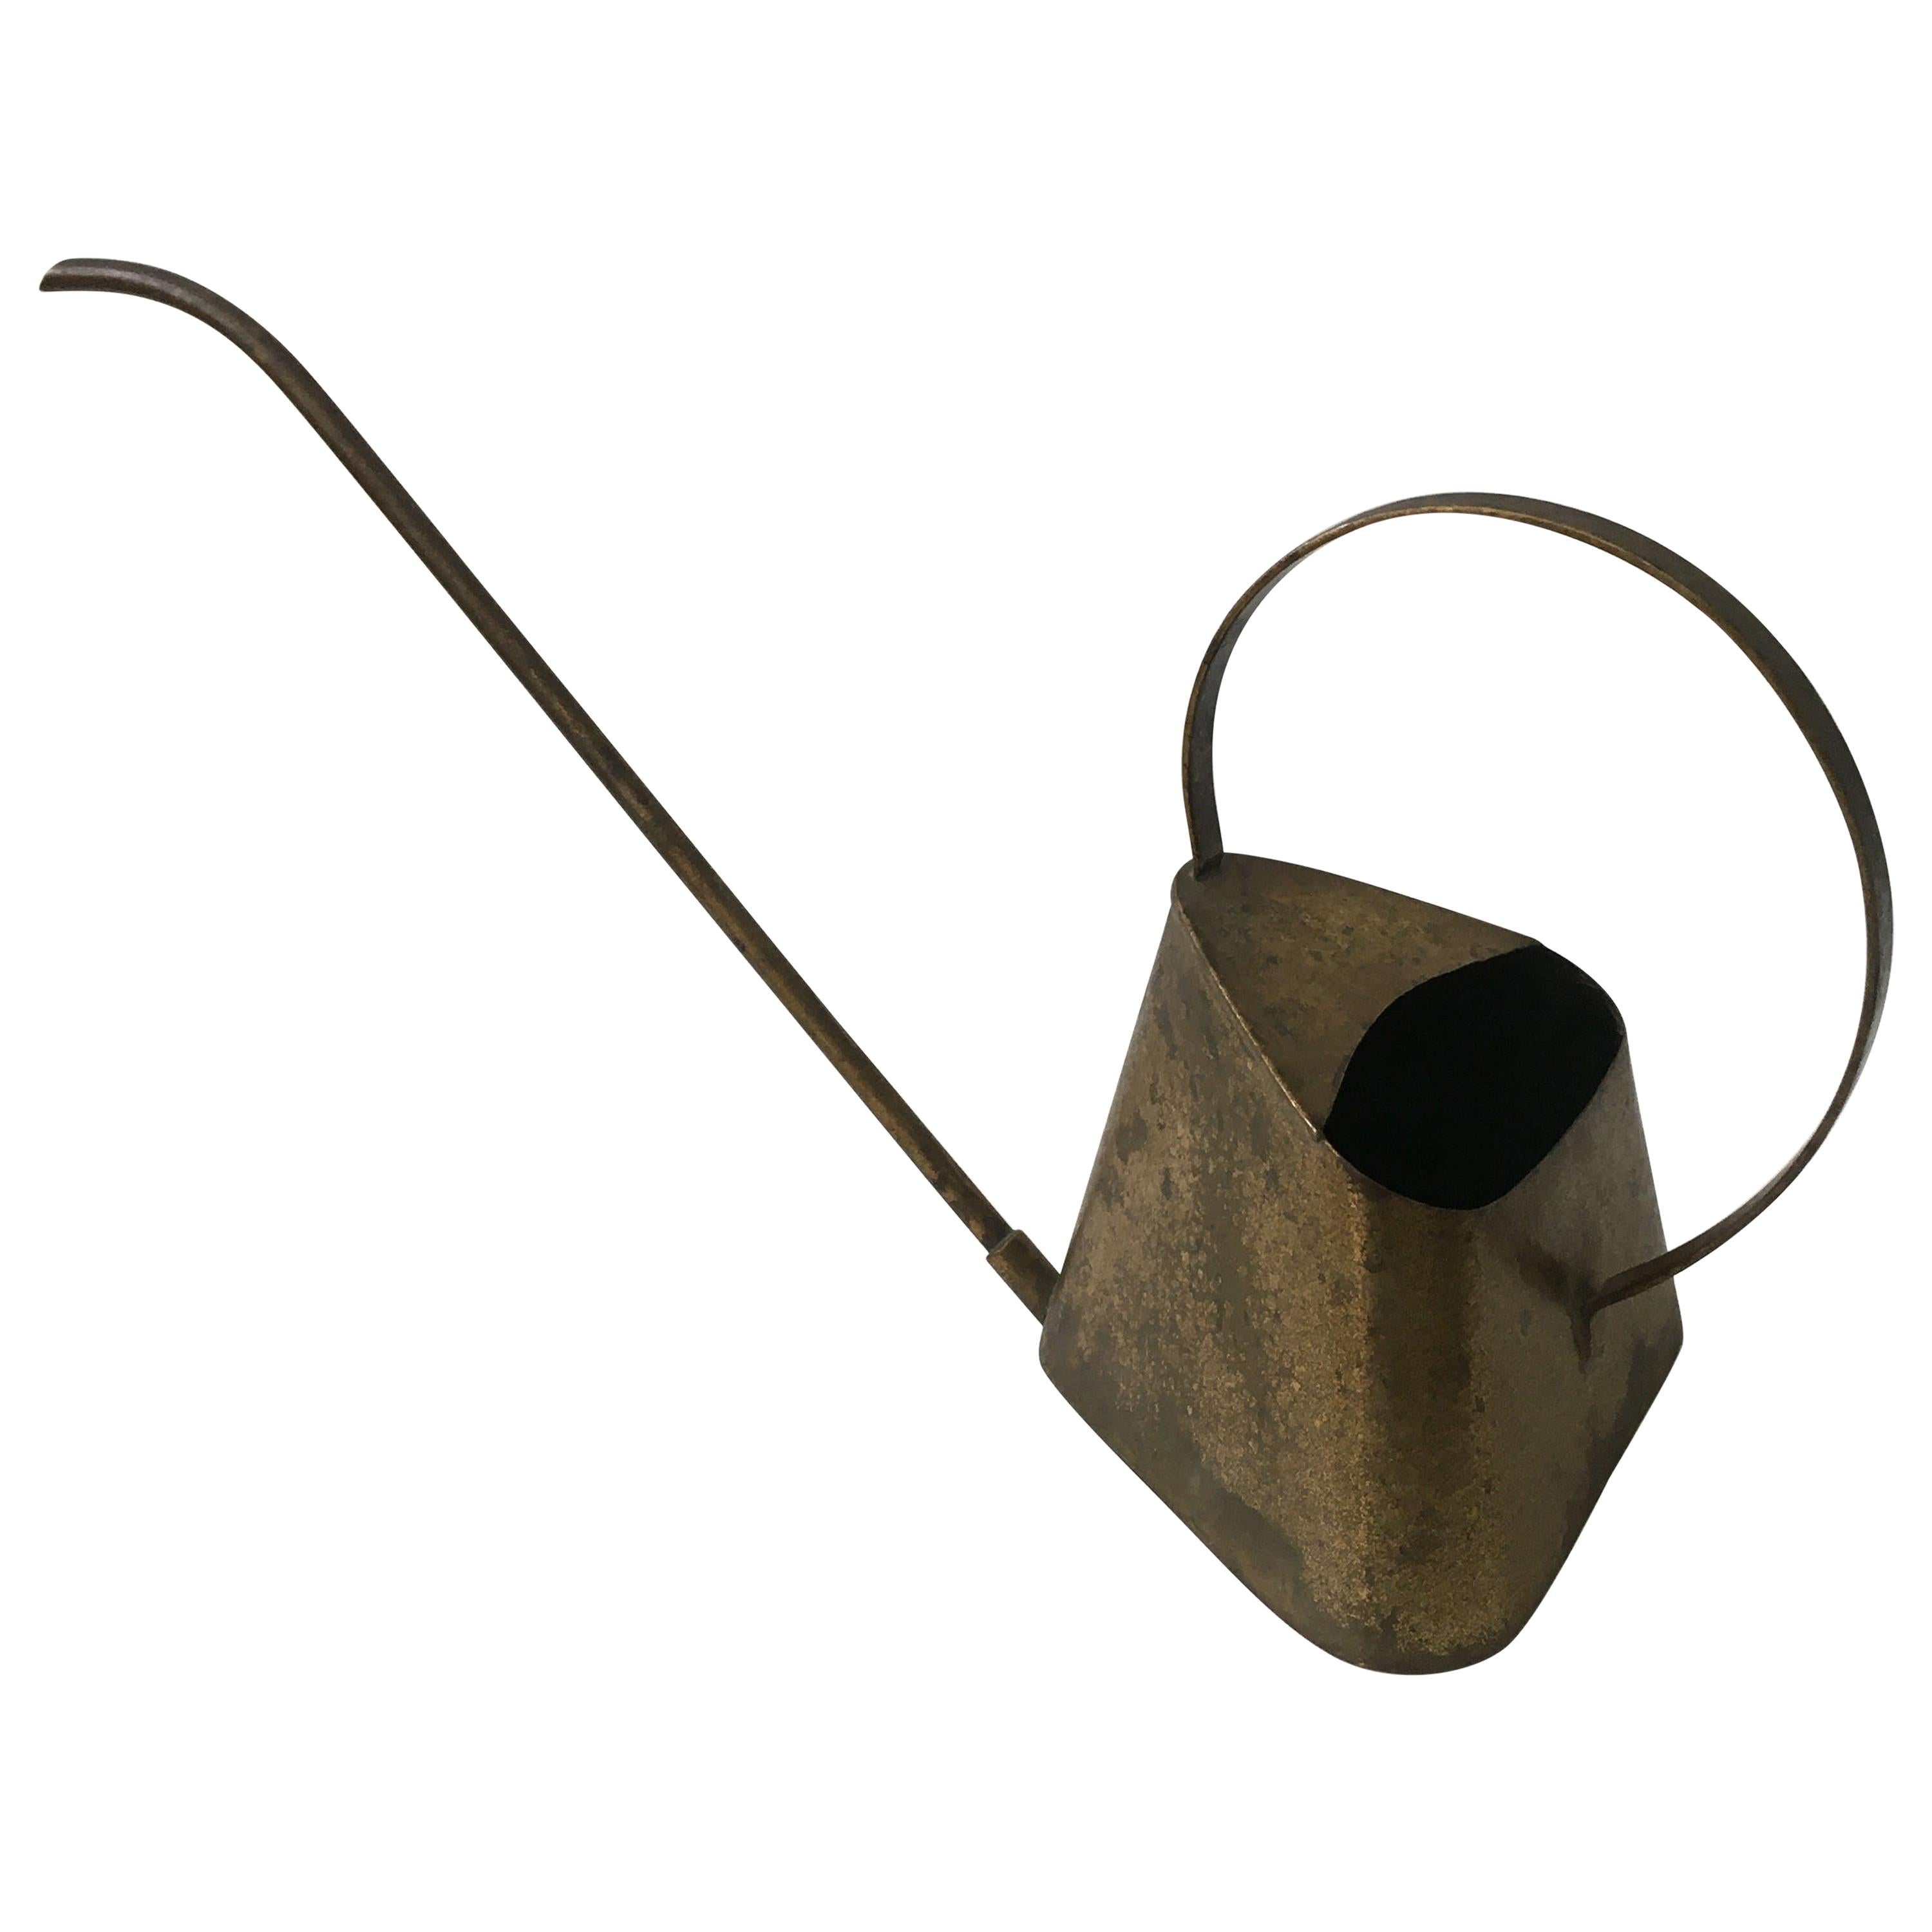 Elegant Modernist Watering Can, Patinated Brass Hammered Style, Austria 1950s